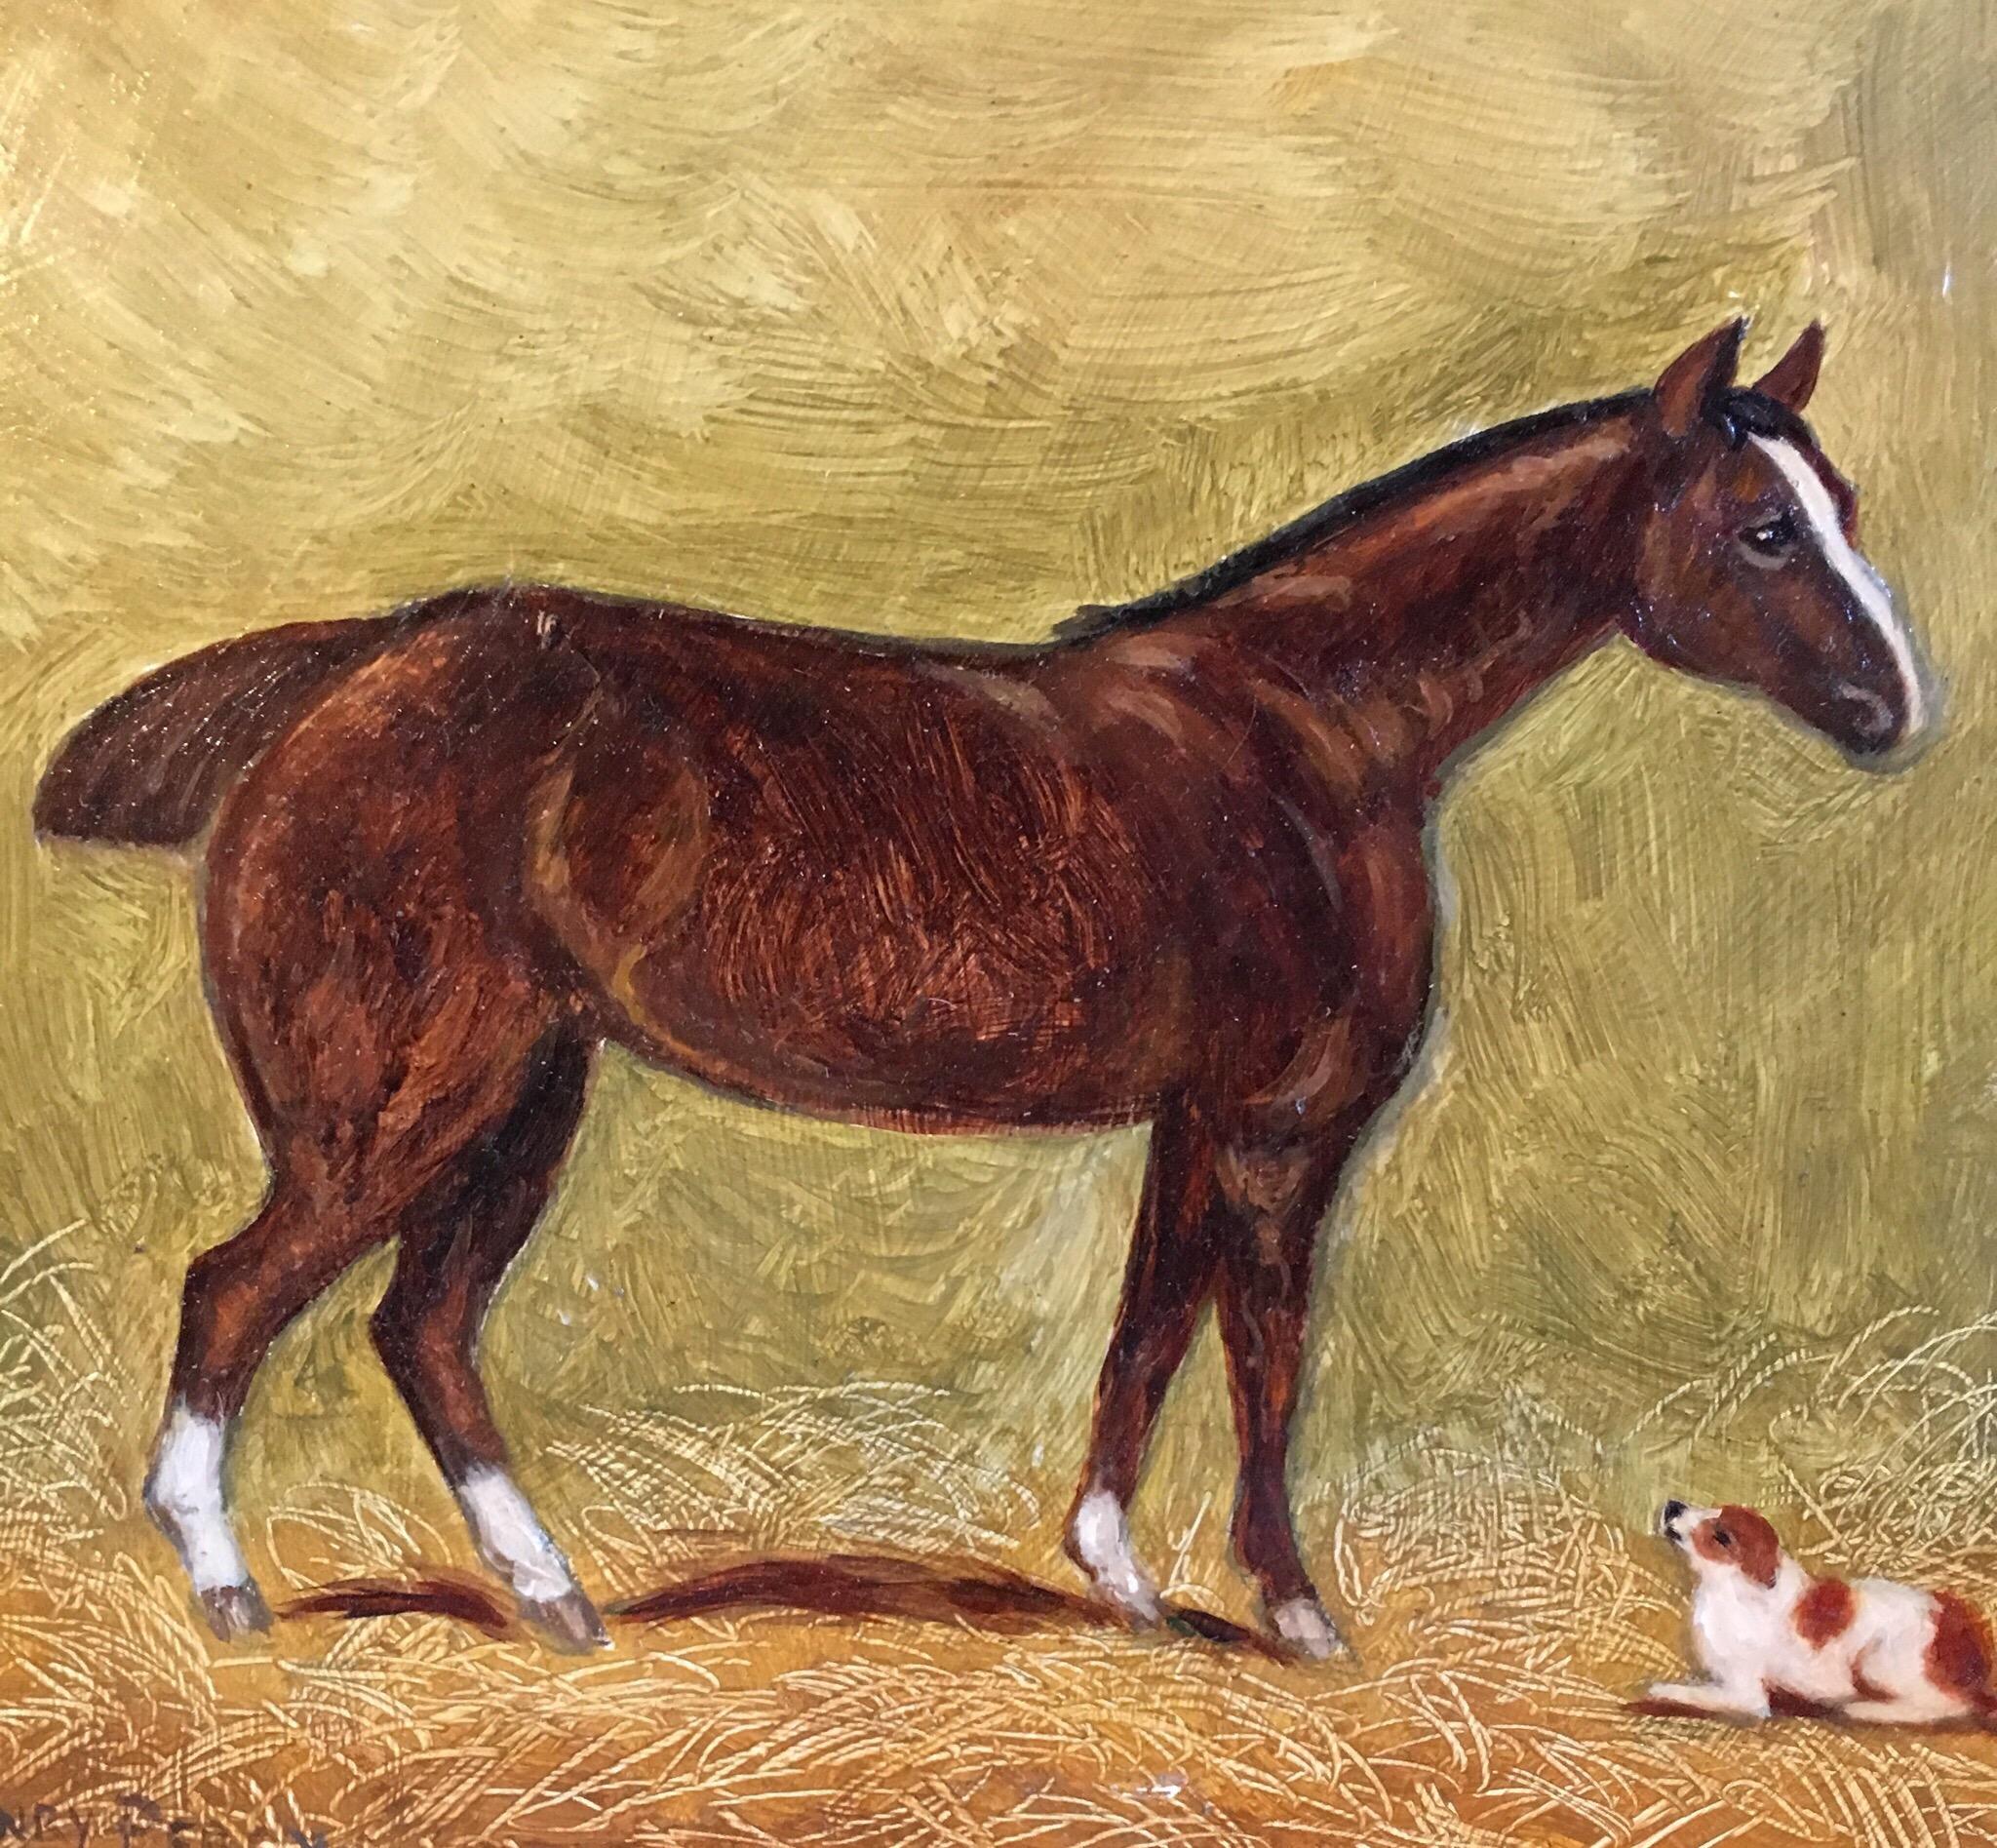 Stable Companions
By Henry Percy, British early 20th century
Signed by the artist on the lower left hand corner
Oil painting on board, framed
Frame size: 12 x 14 inches

Endearing oil painting of a beautiful horse enjoying the company of a little